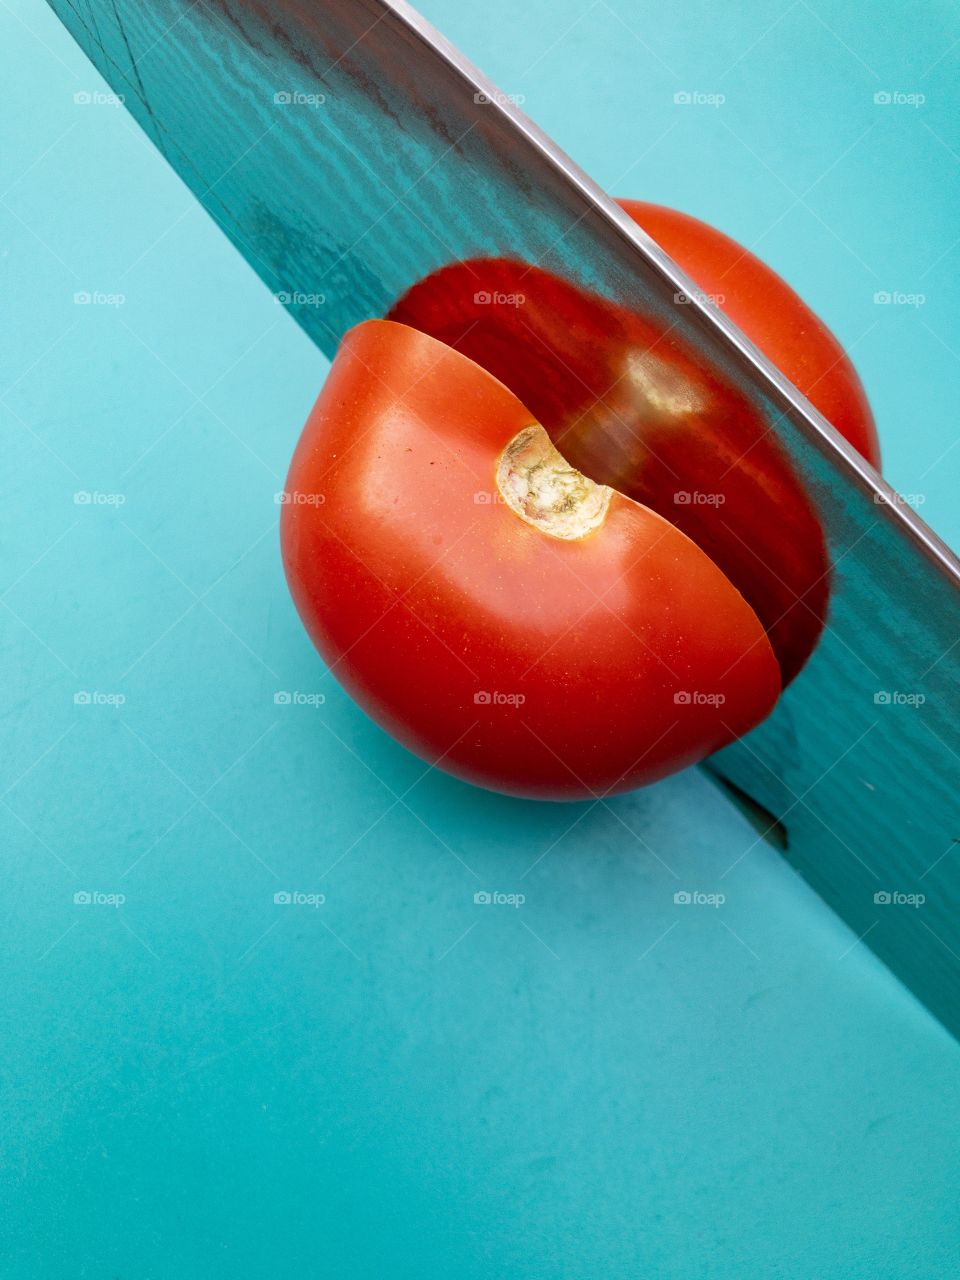 Tomatoe and knife / Tomate und Messer